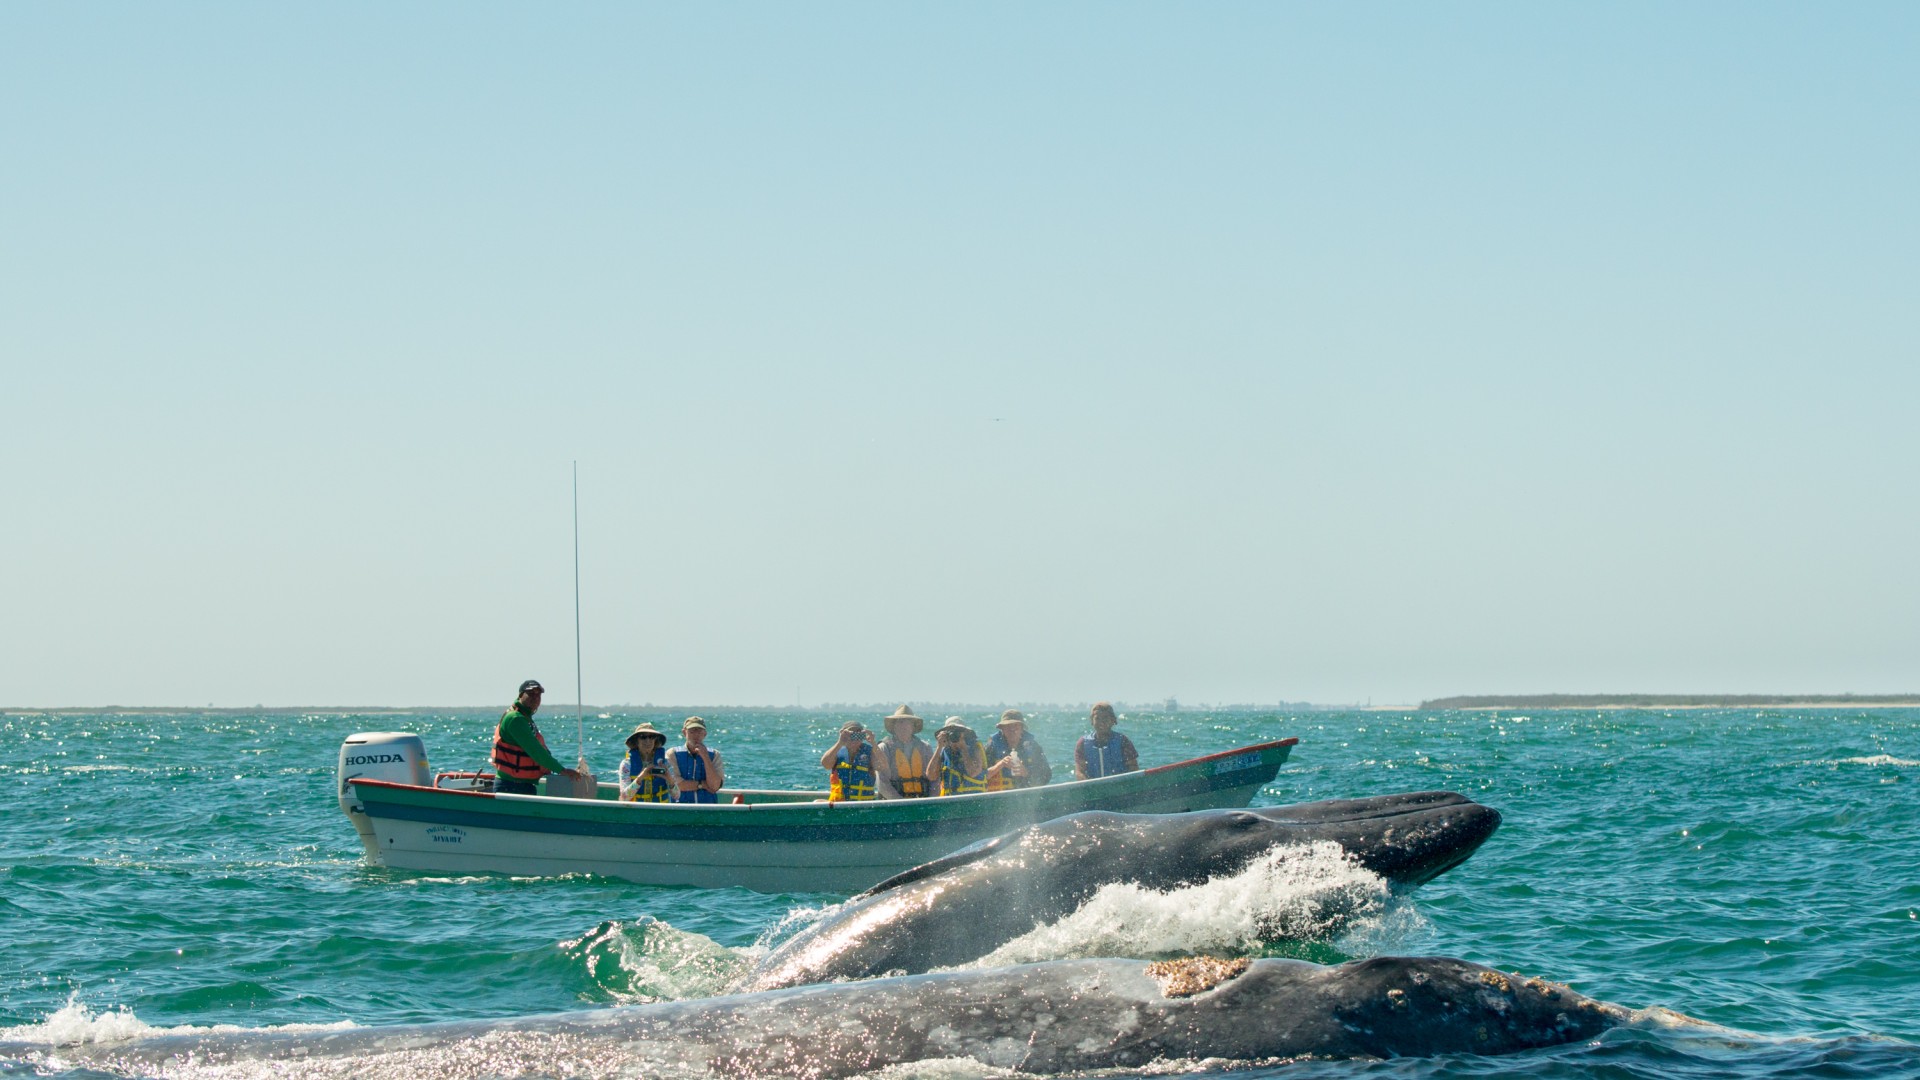 A large gray whale swimming up to a boat full of tourists in awe